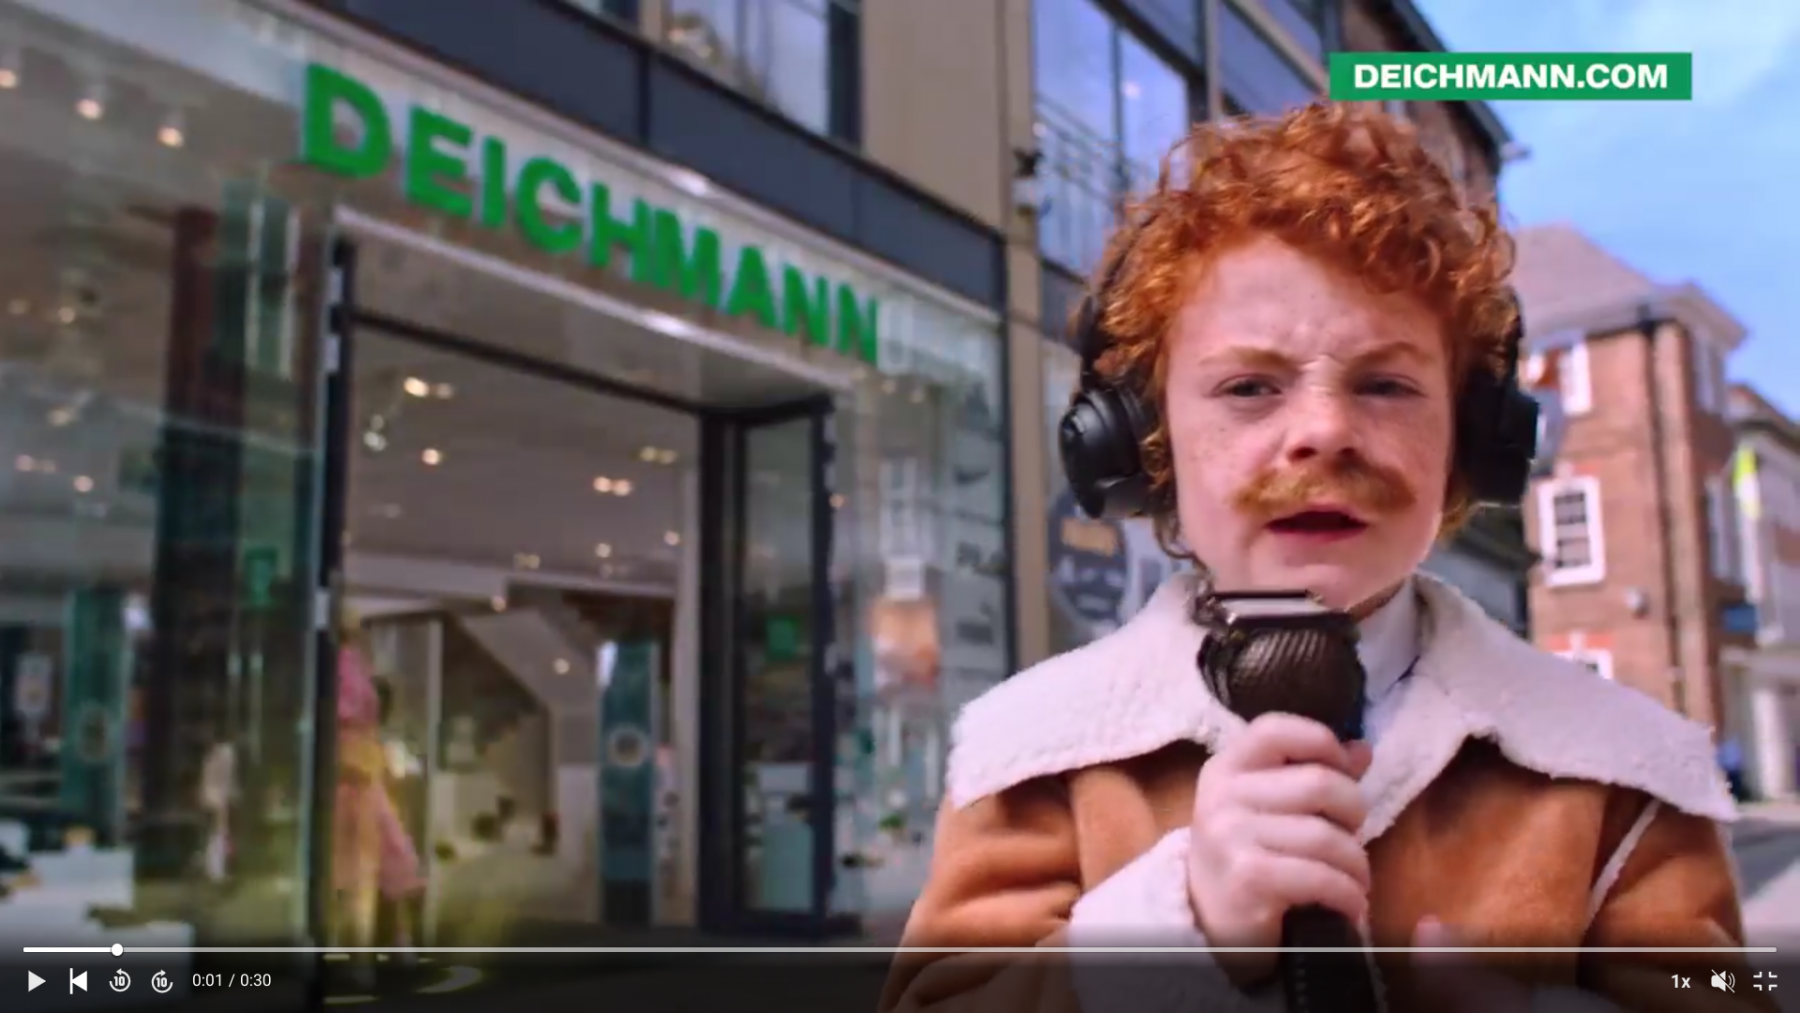 kan opfattes Forgænger brændt Manchester agency launches TV campaign for Deichmann Prolific North